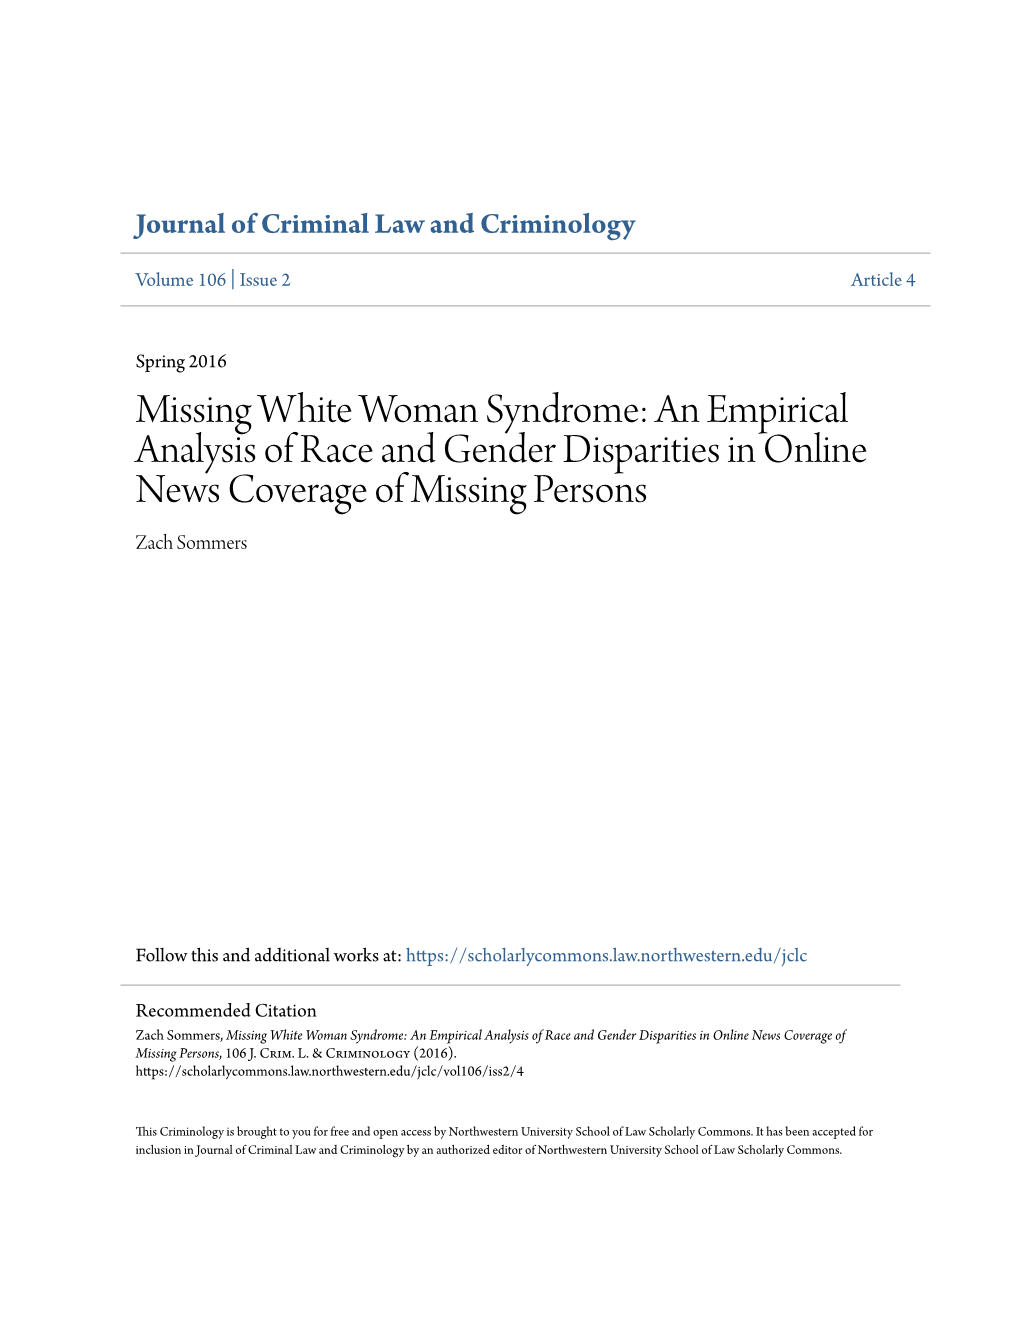 Missing White Woman Syndrome: an Empirical Analysis of Race and Gender Disparities in Online News Coverage of Missing Persons Zach Sommers